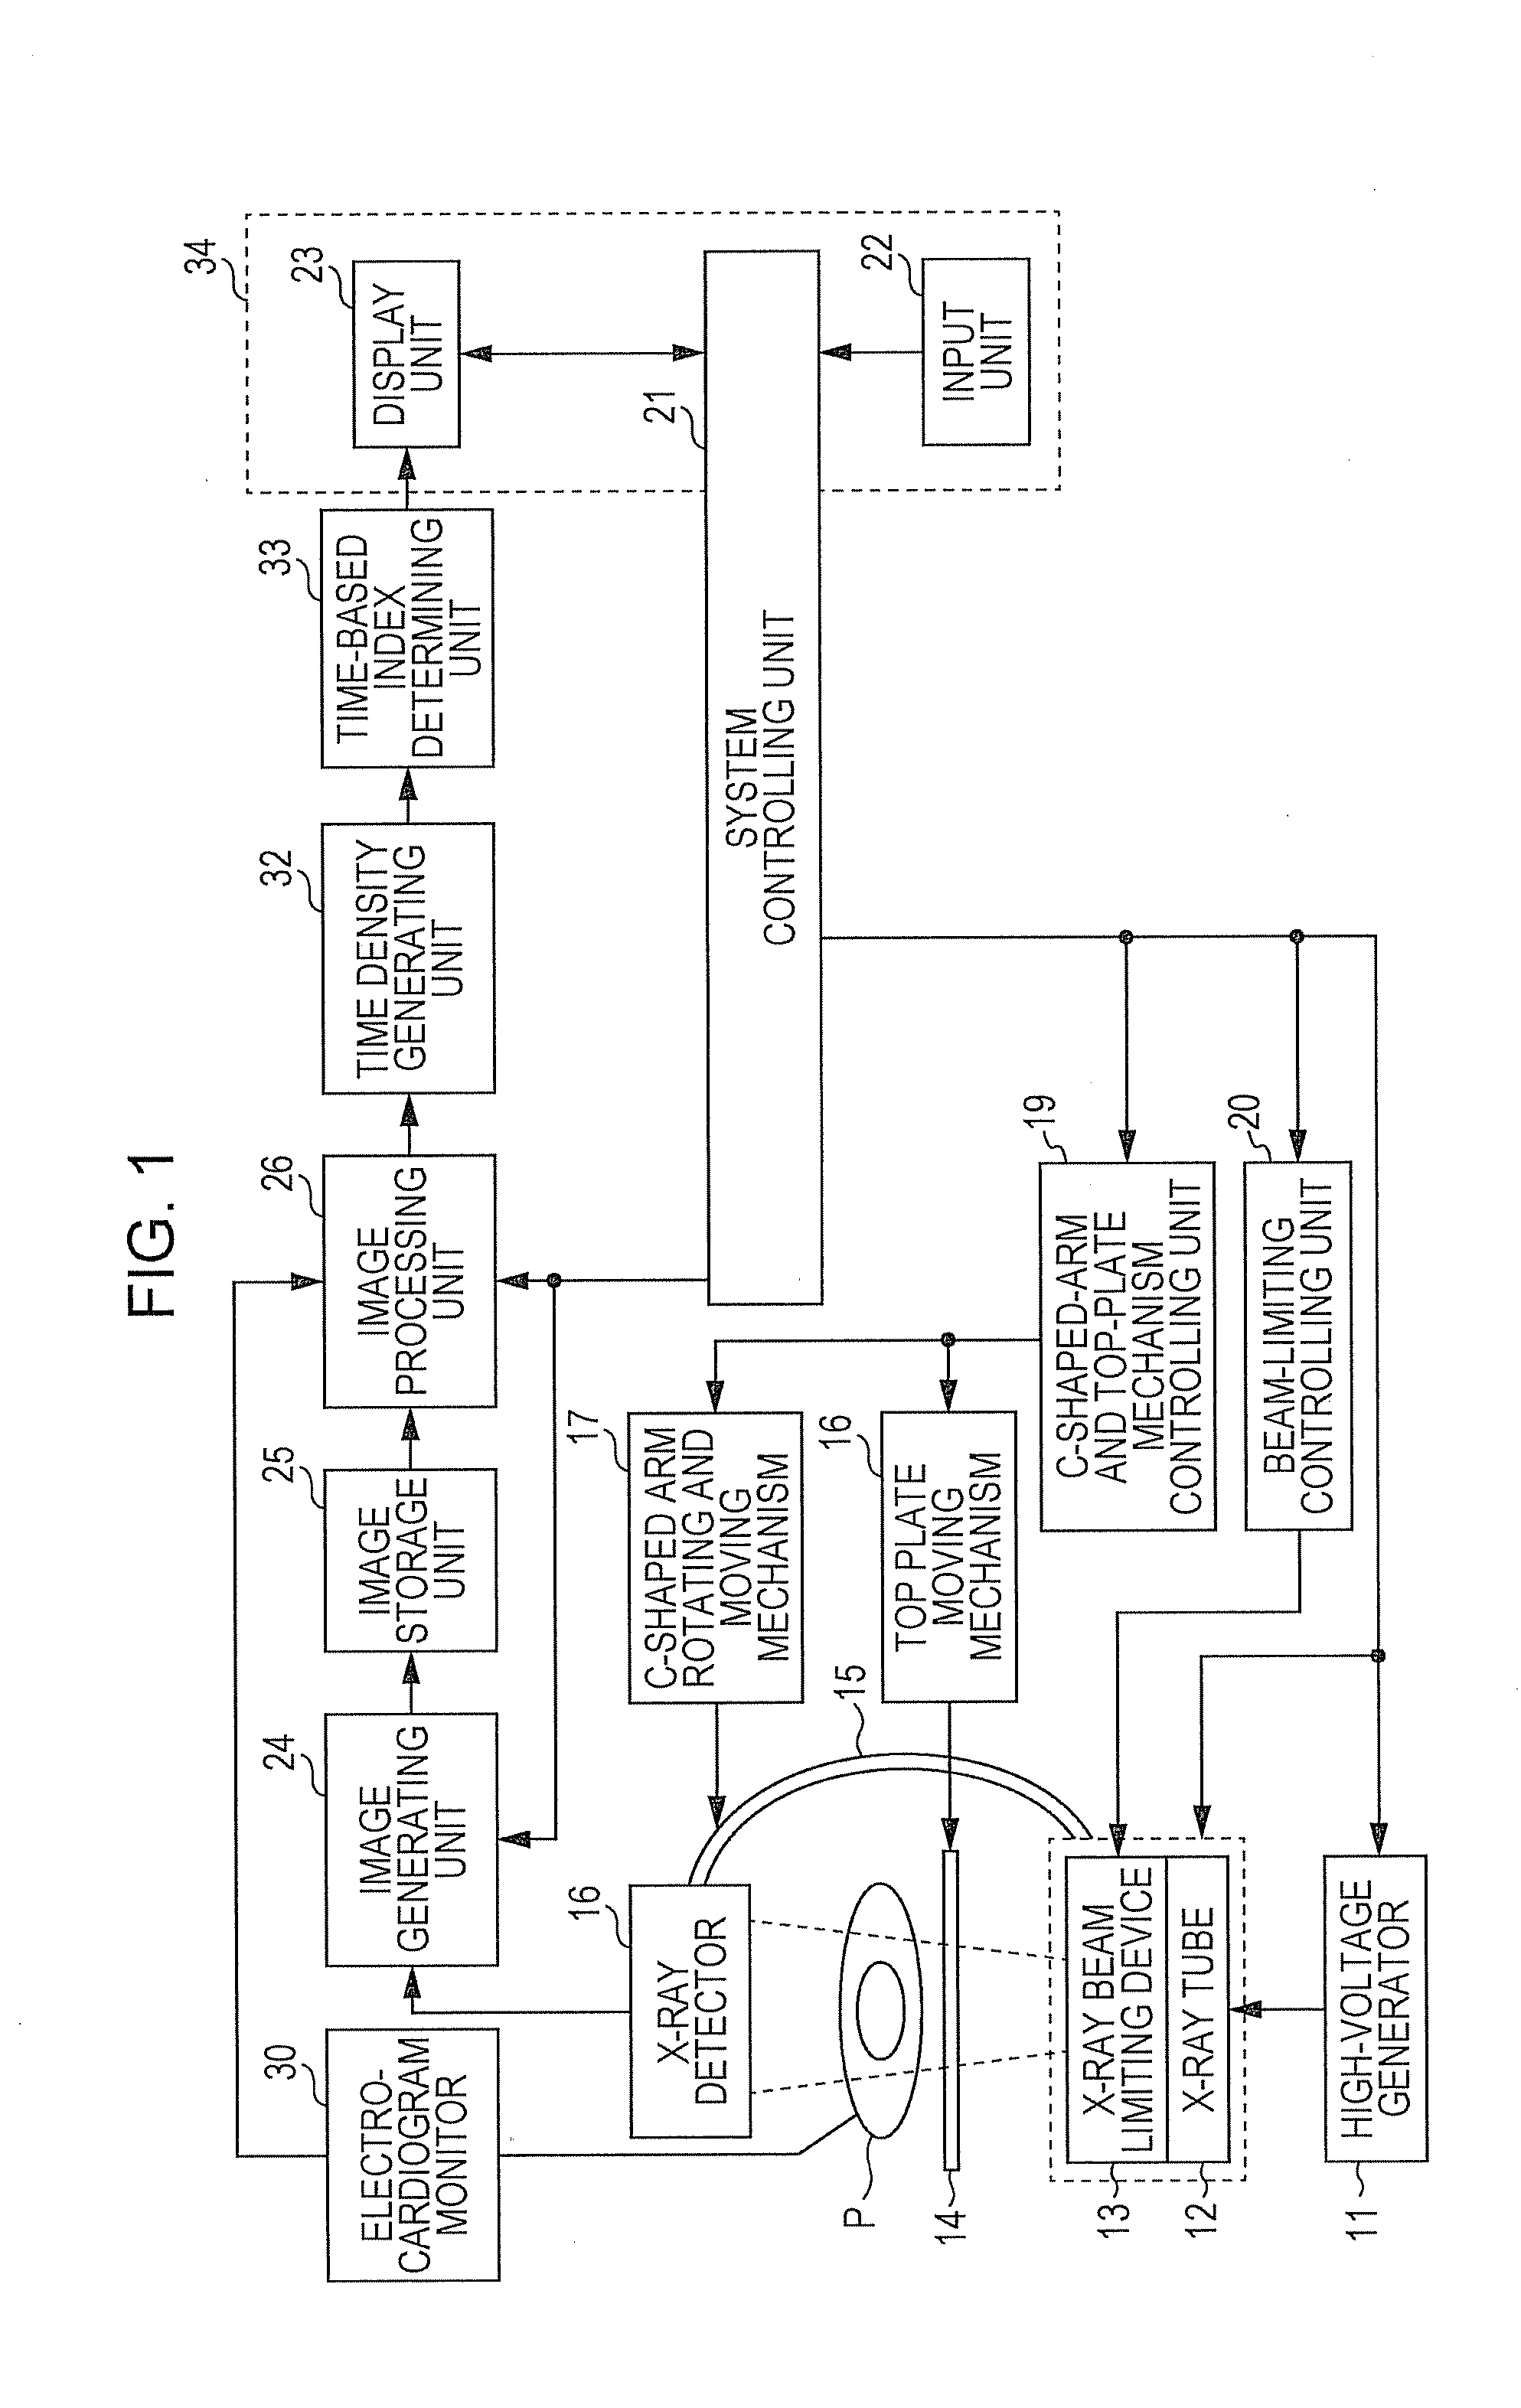 Method and system for determining time-based index for blood circulation from angiographic imaging data